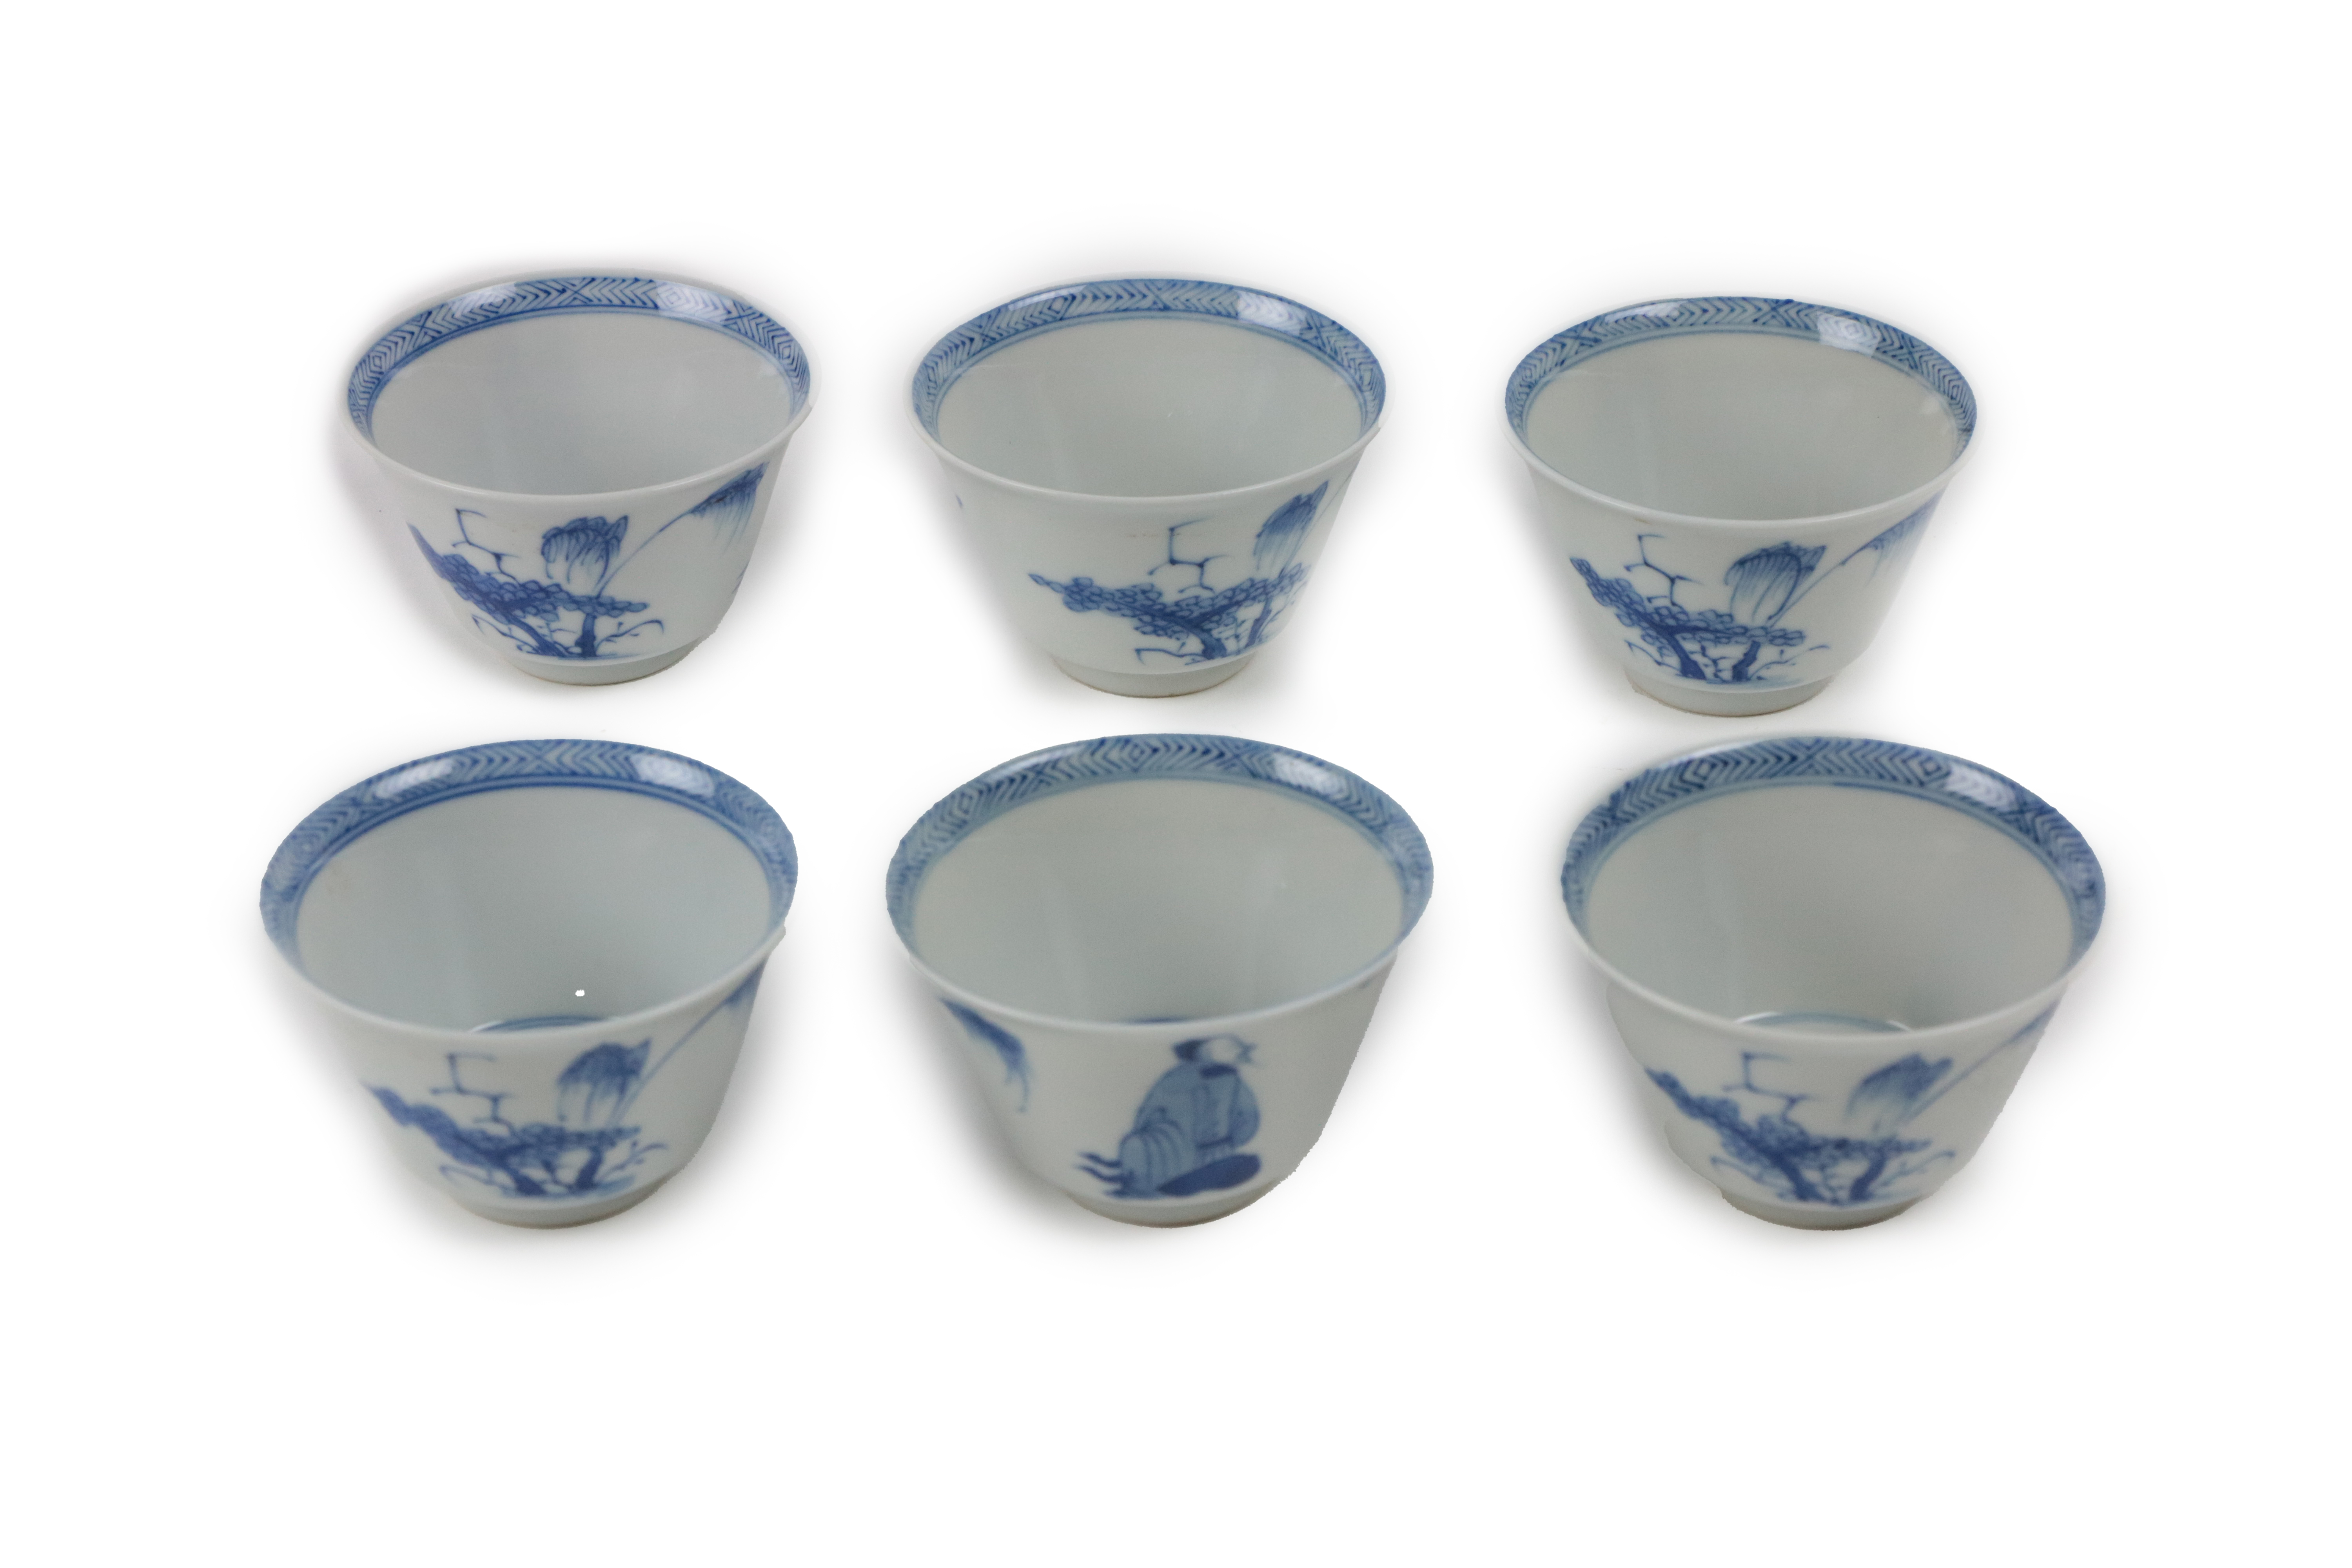 A set of 6 Chinese blue and white Tea Cups, each with landscape medallion interior, the exterior